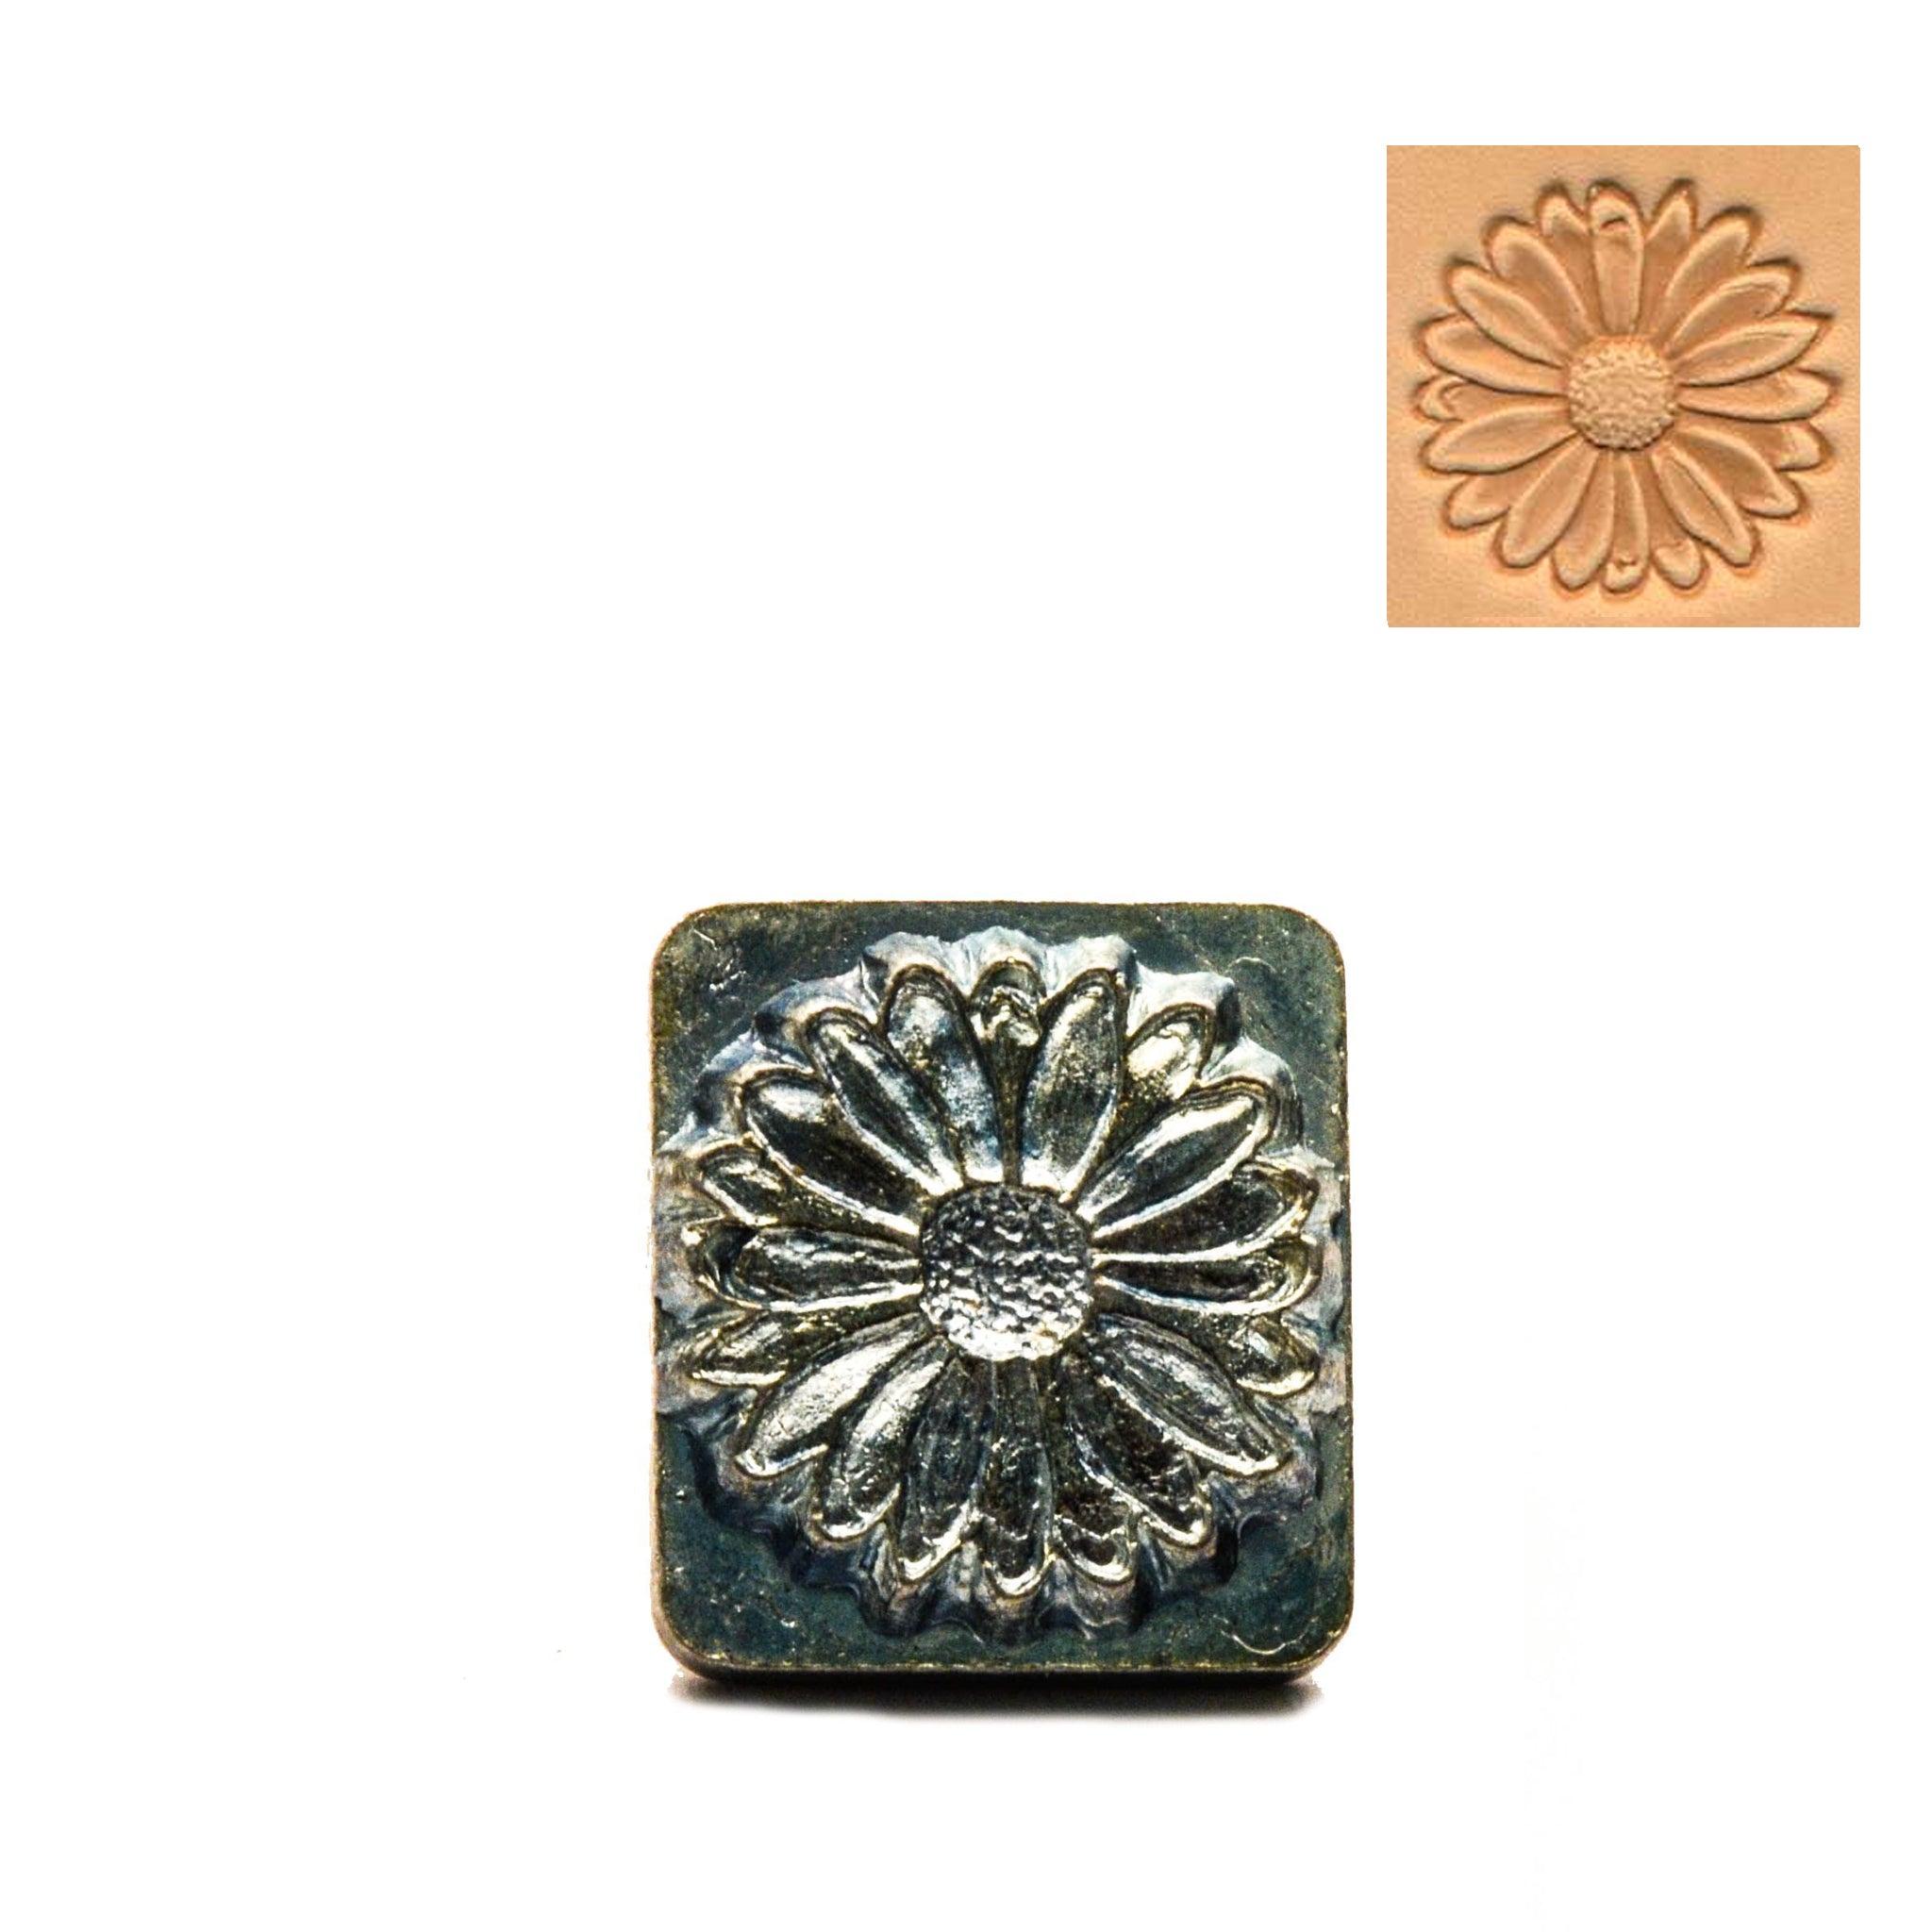 Sunflower 3D Embossing Stamp from Identity Leathercraft